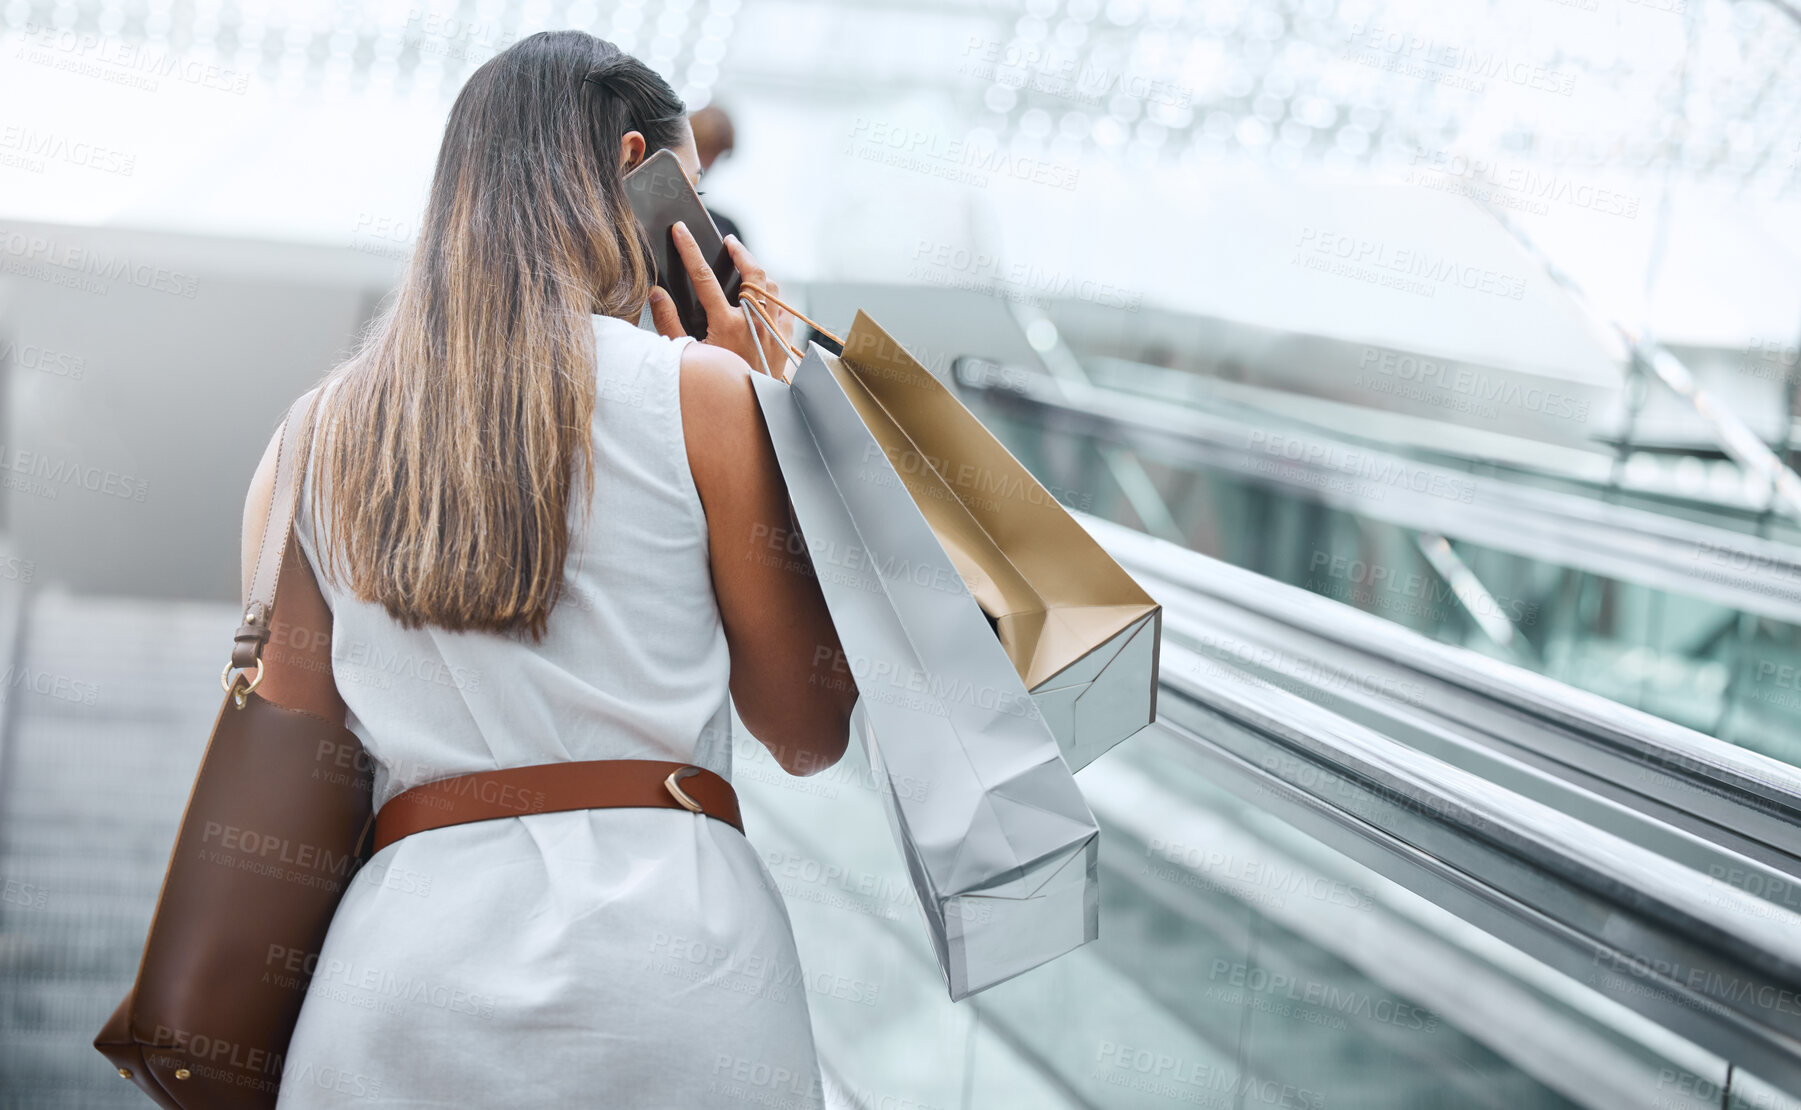 Buy stock photo Rear view of a woman talking on her cellphone while out on a shopping spree. Female having retail therapy while staying connected with her smartphone. Calling to find a sale and discount. Telling friends about sale at mall or calling bank to increase spending limit